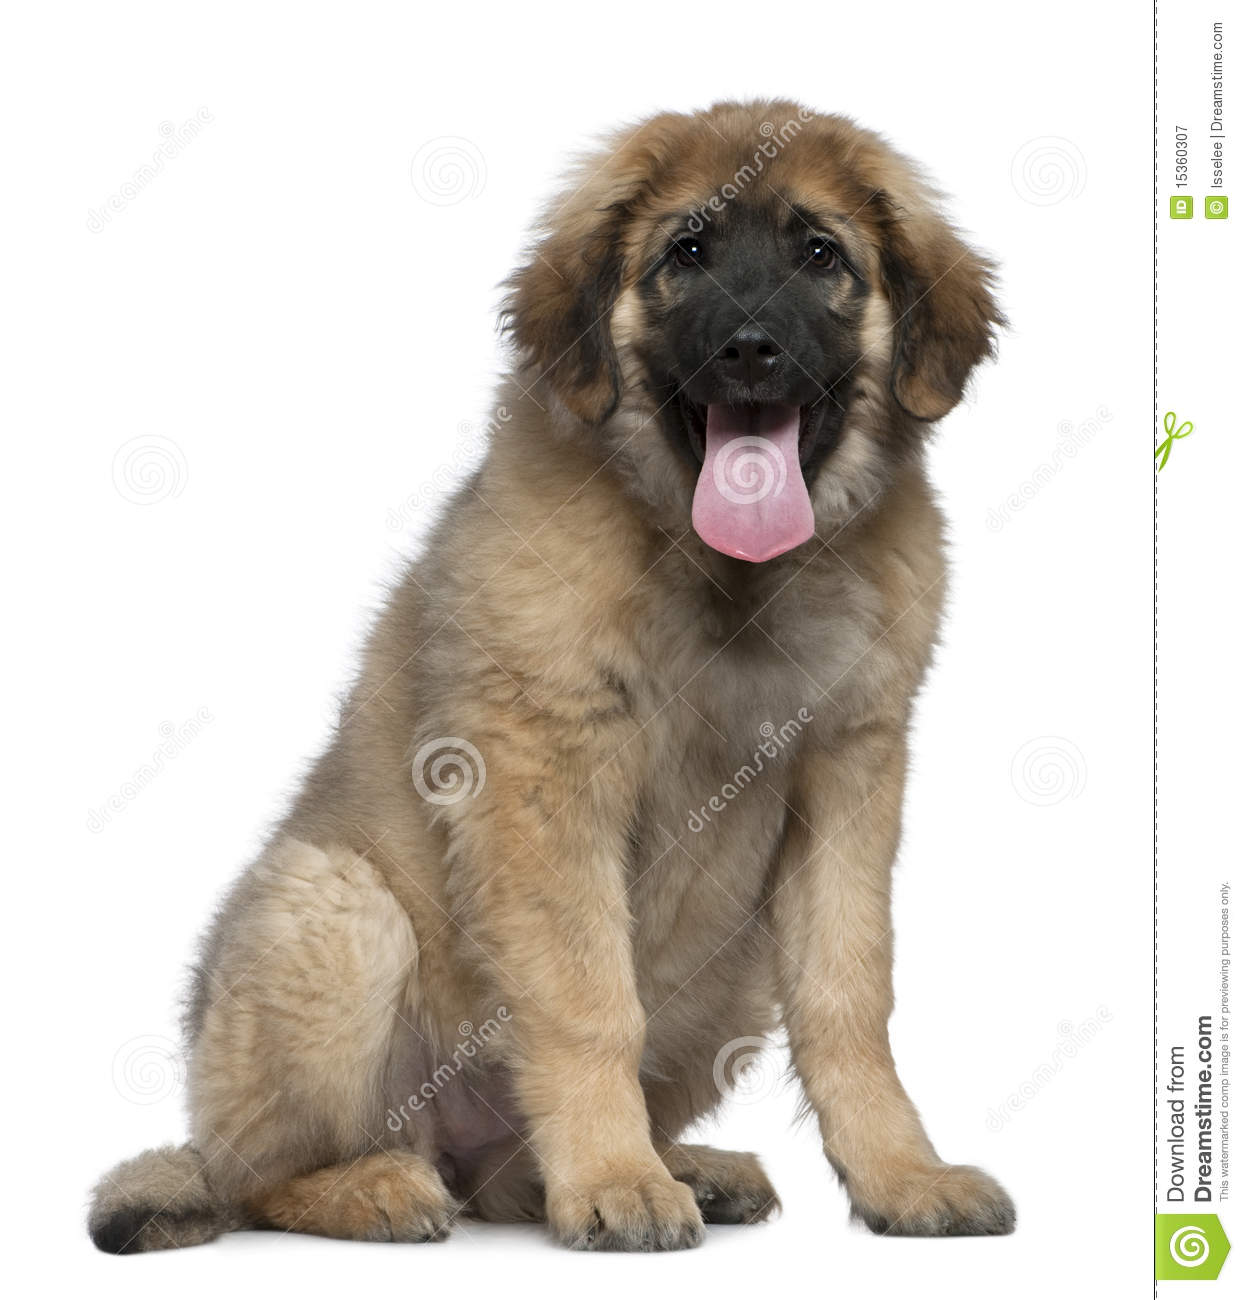 Leonberger clipart #13, Download drawings